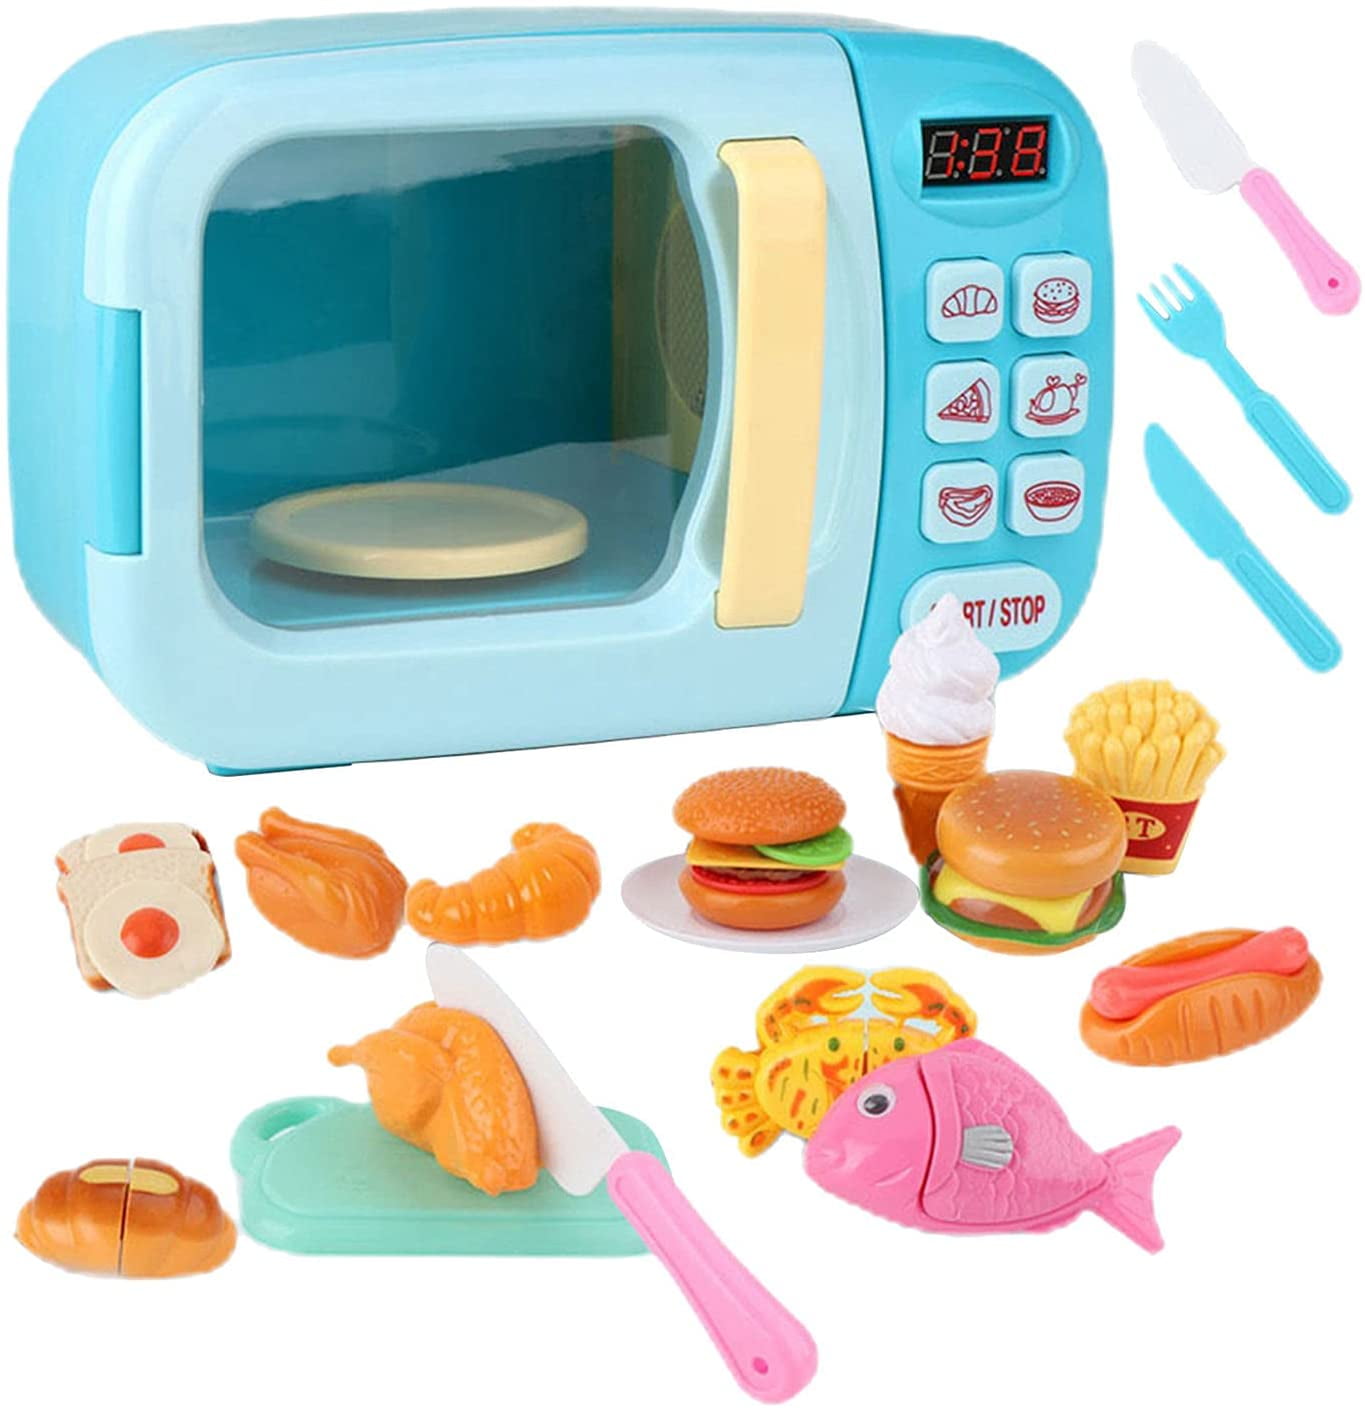 Kids Child's Color-Changing Magic Microwave Playset w/ Play Food 